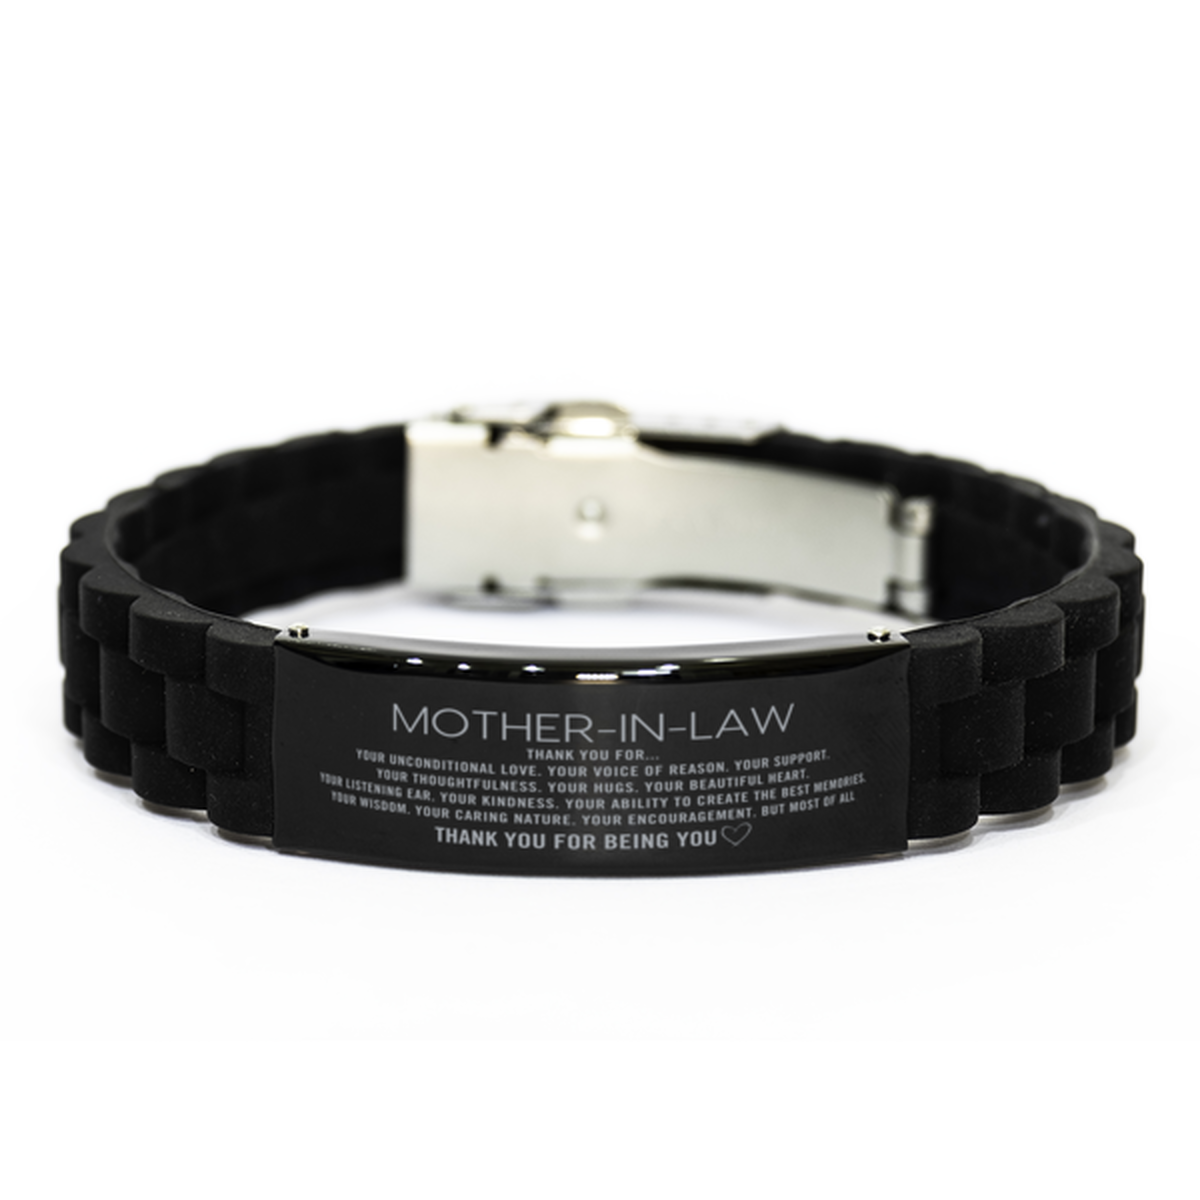 Mother-In-Law Black Glidelock Clasp Bracelet Custom, Engraved Gifts For Mother-In-Law Christmas Graduation Birthday Gifts for Men Women Mother-In-Law Thank you for Your unconditional love